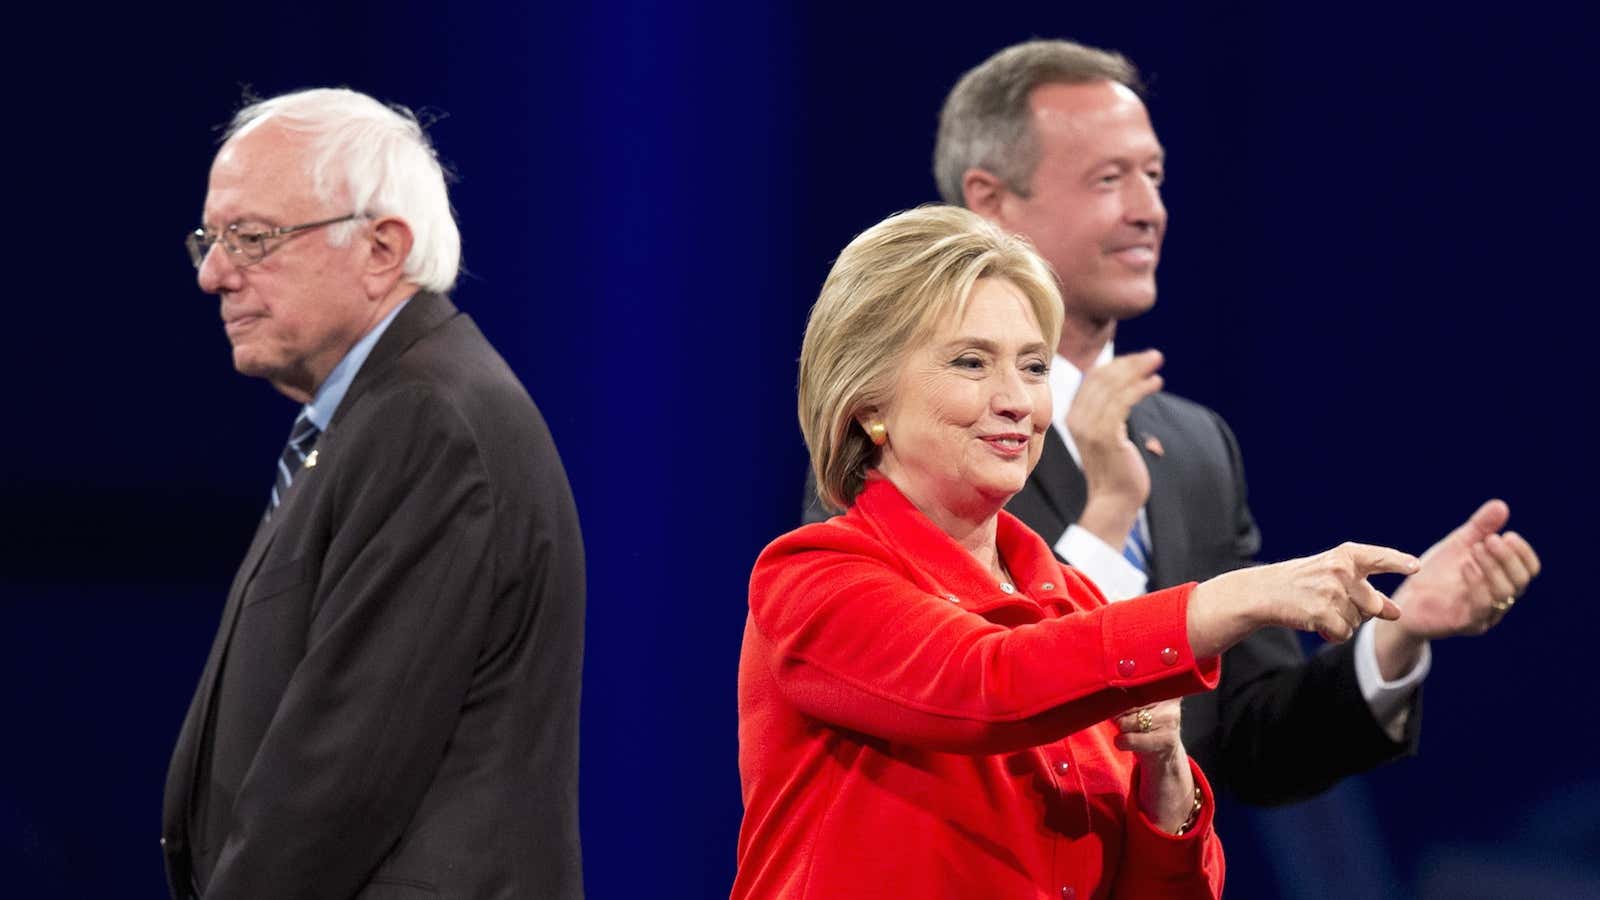 The Democratic frontrunners aren’t shying away from hitting each other where it hurts.